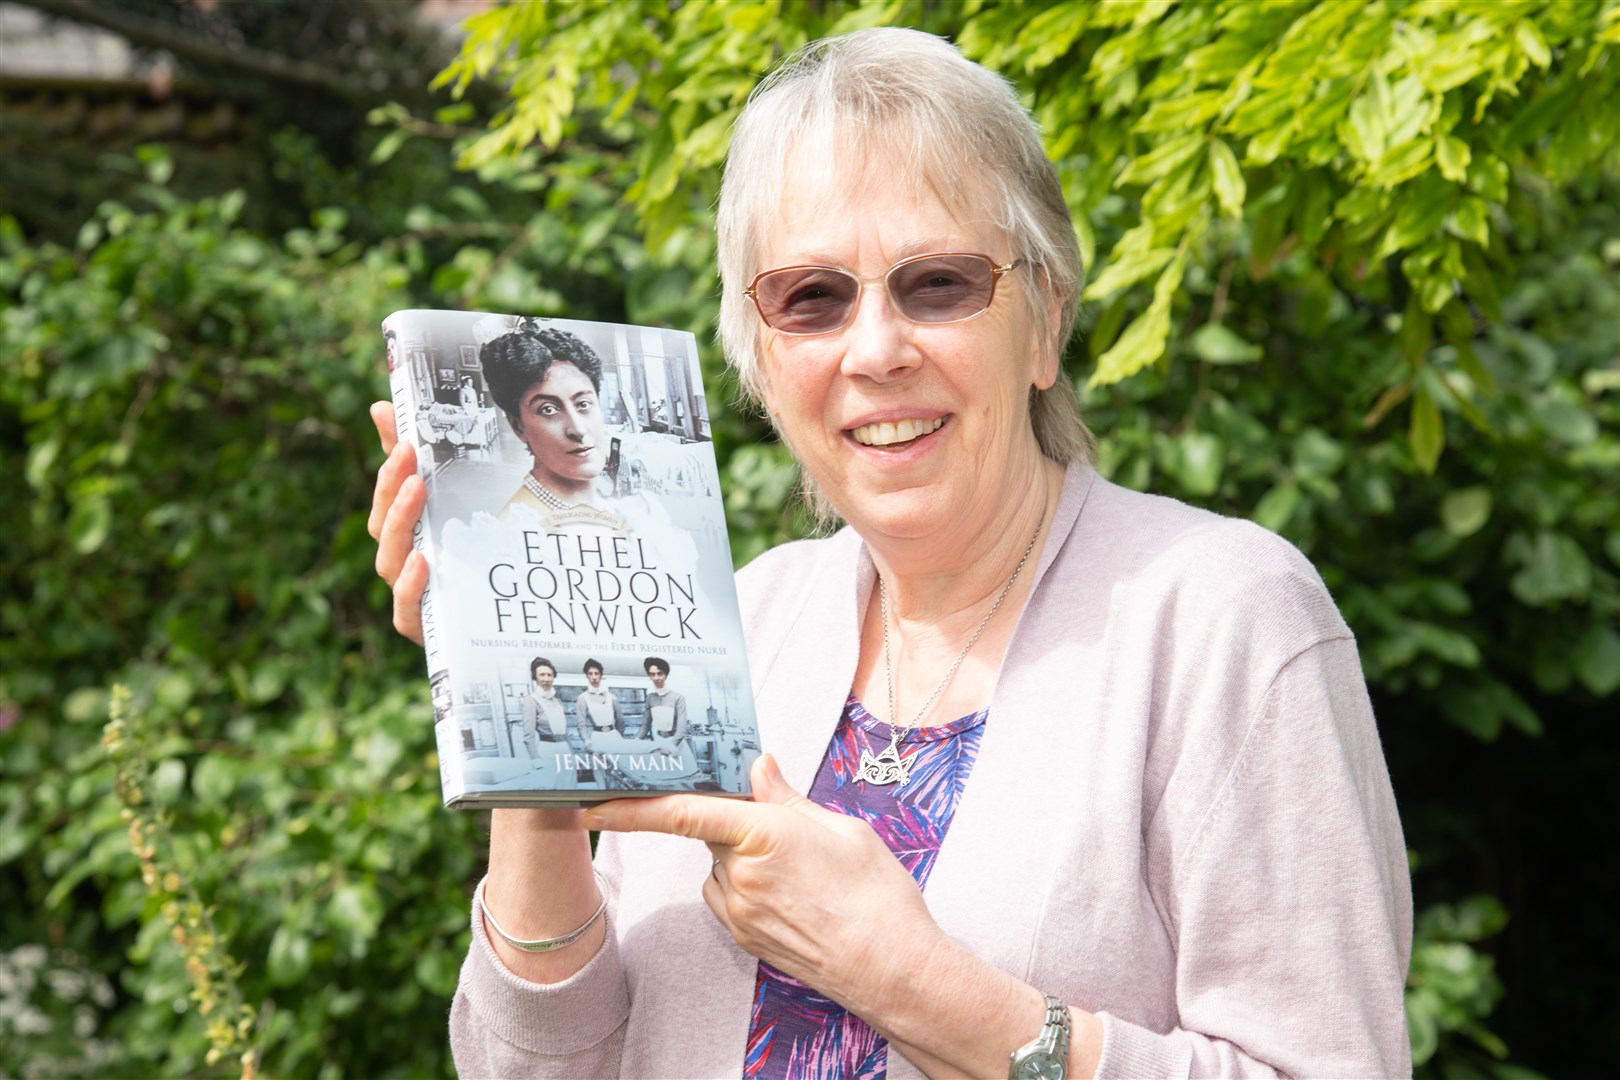 Jenny Main and her book about Ethel Gordon Fenwick. Picture: Daniel Forsyth.